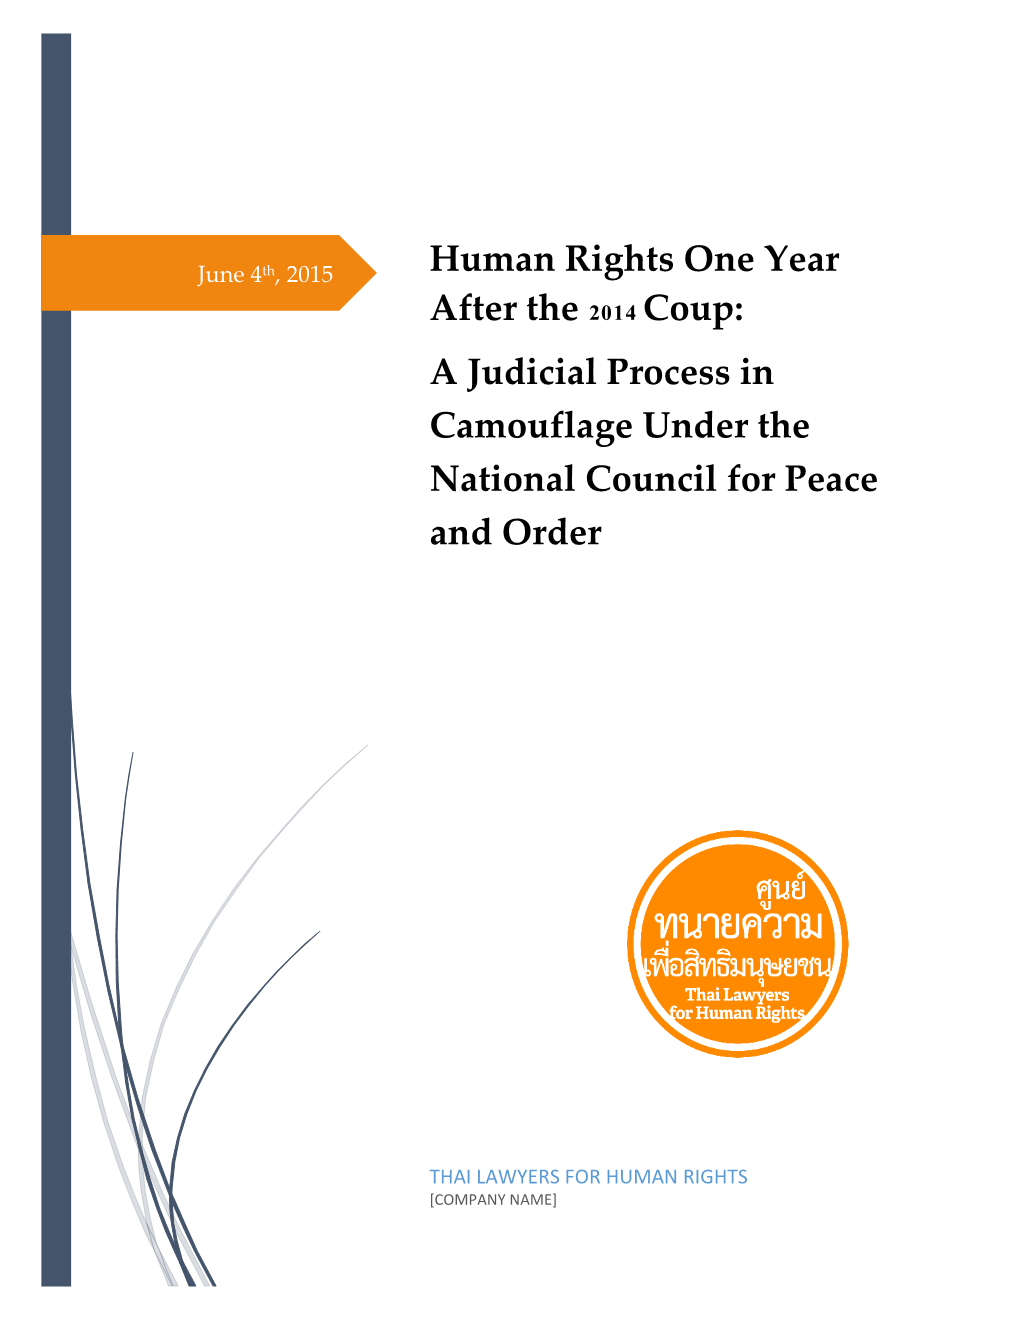 Human Rights One Year After the 2014 Coup: a Judicial Process in Camouflage Under the National Council for Peace and Order